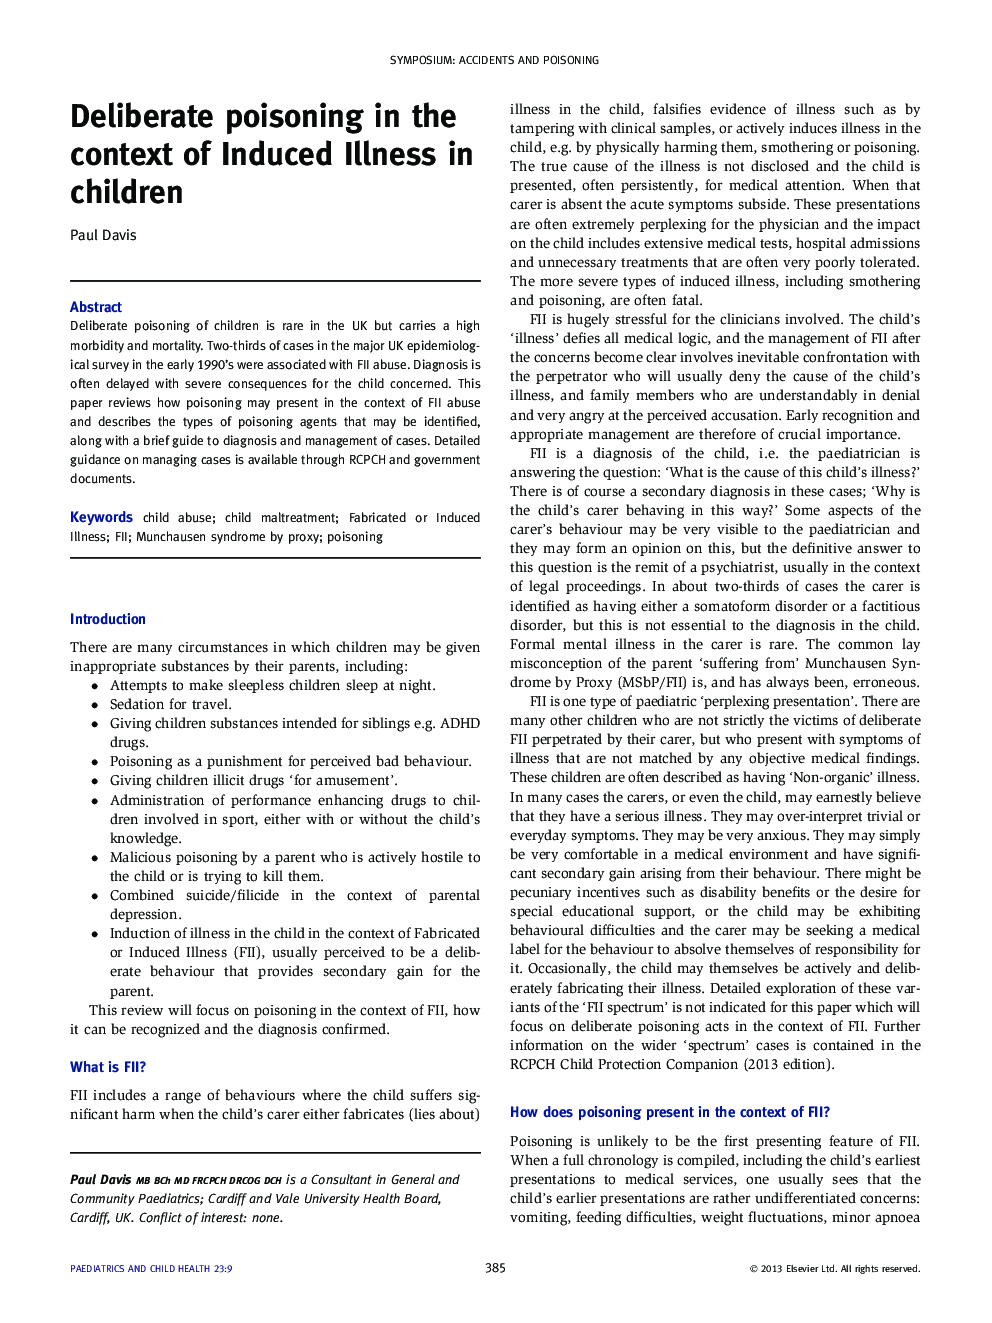 Deliberate poisoning in the context of Induced Illness in children